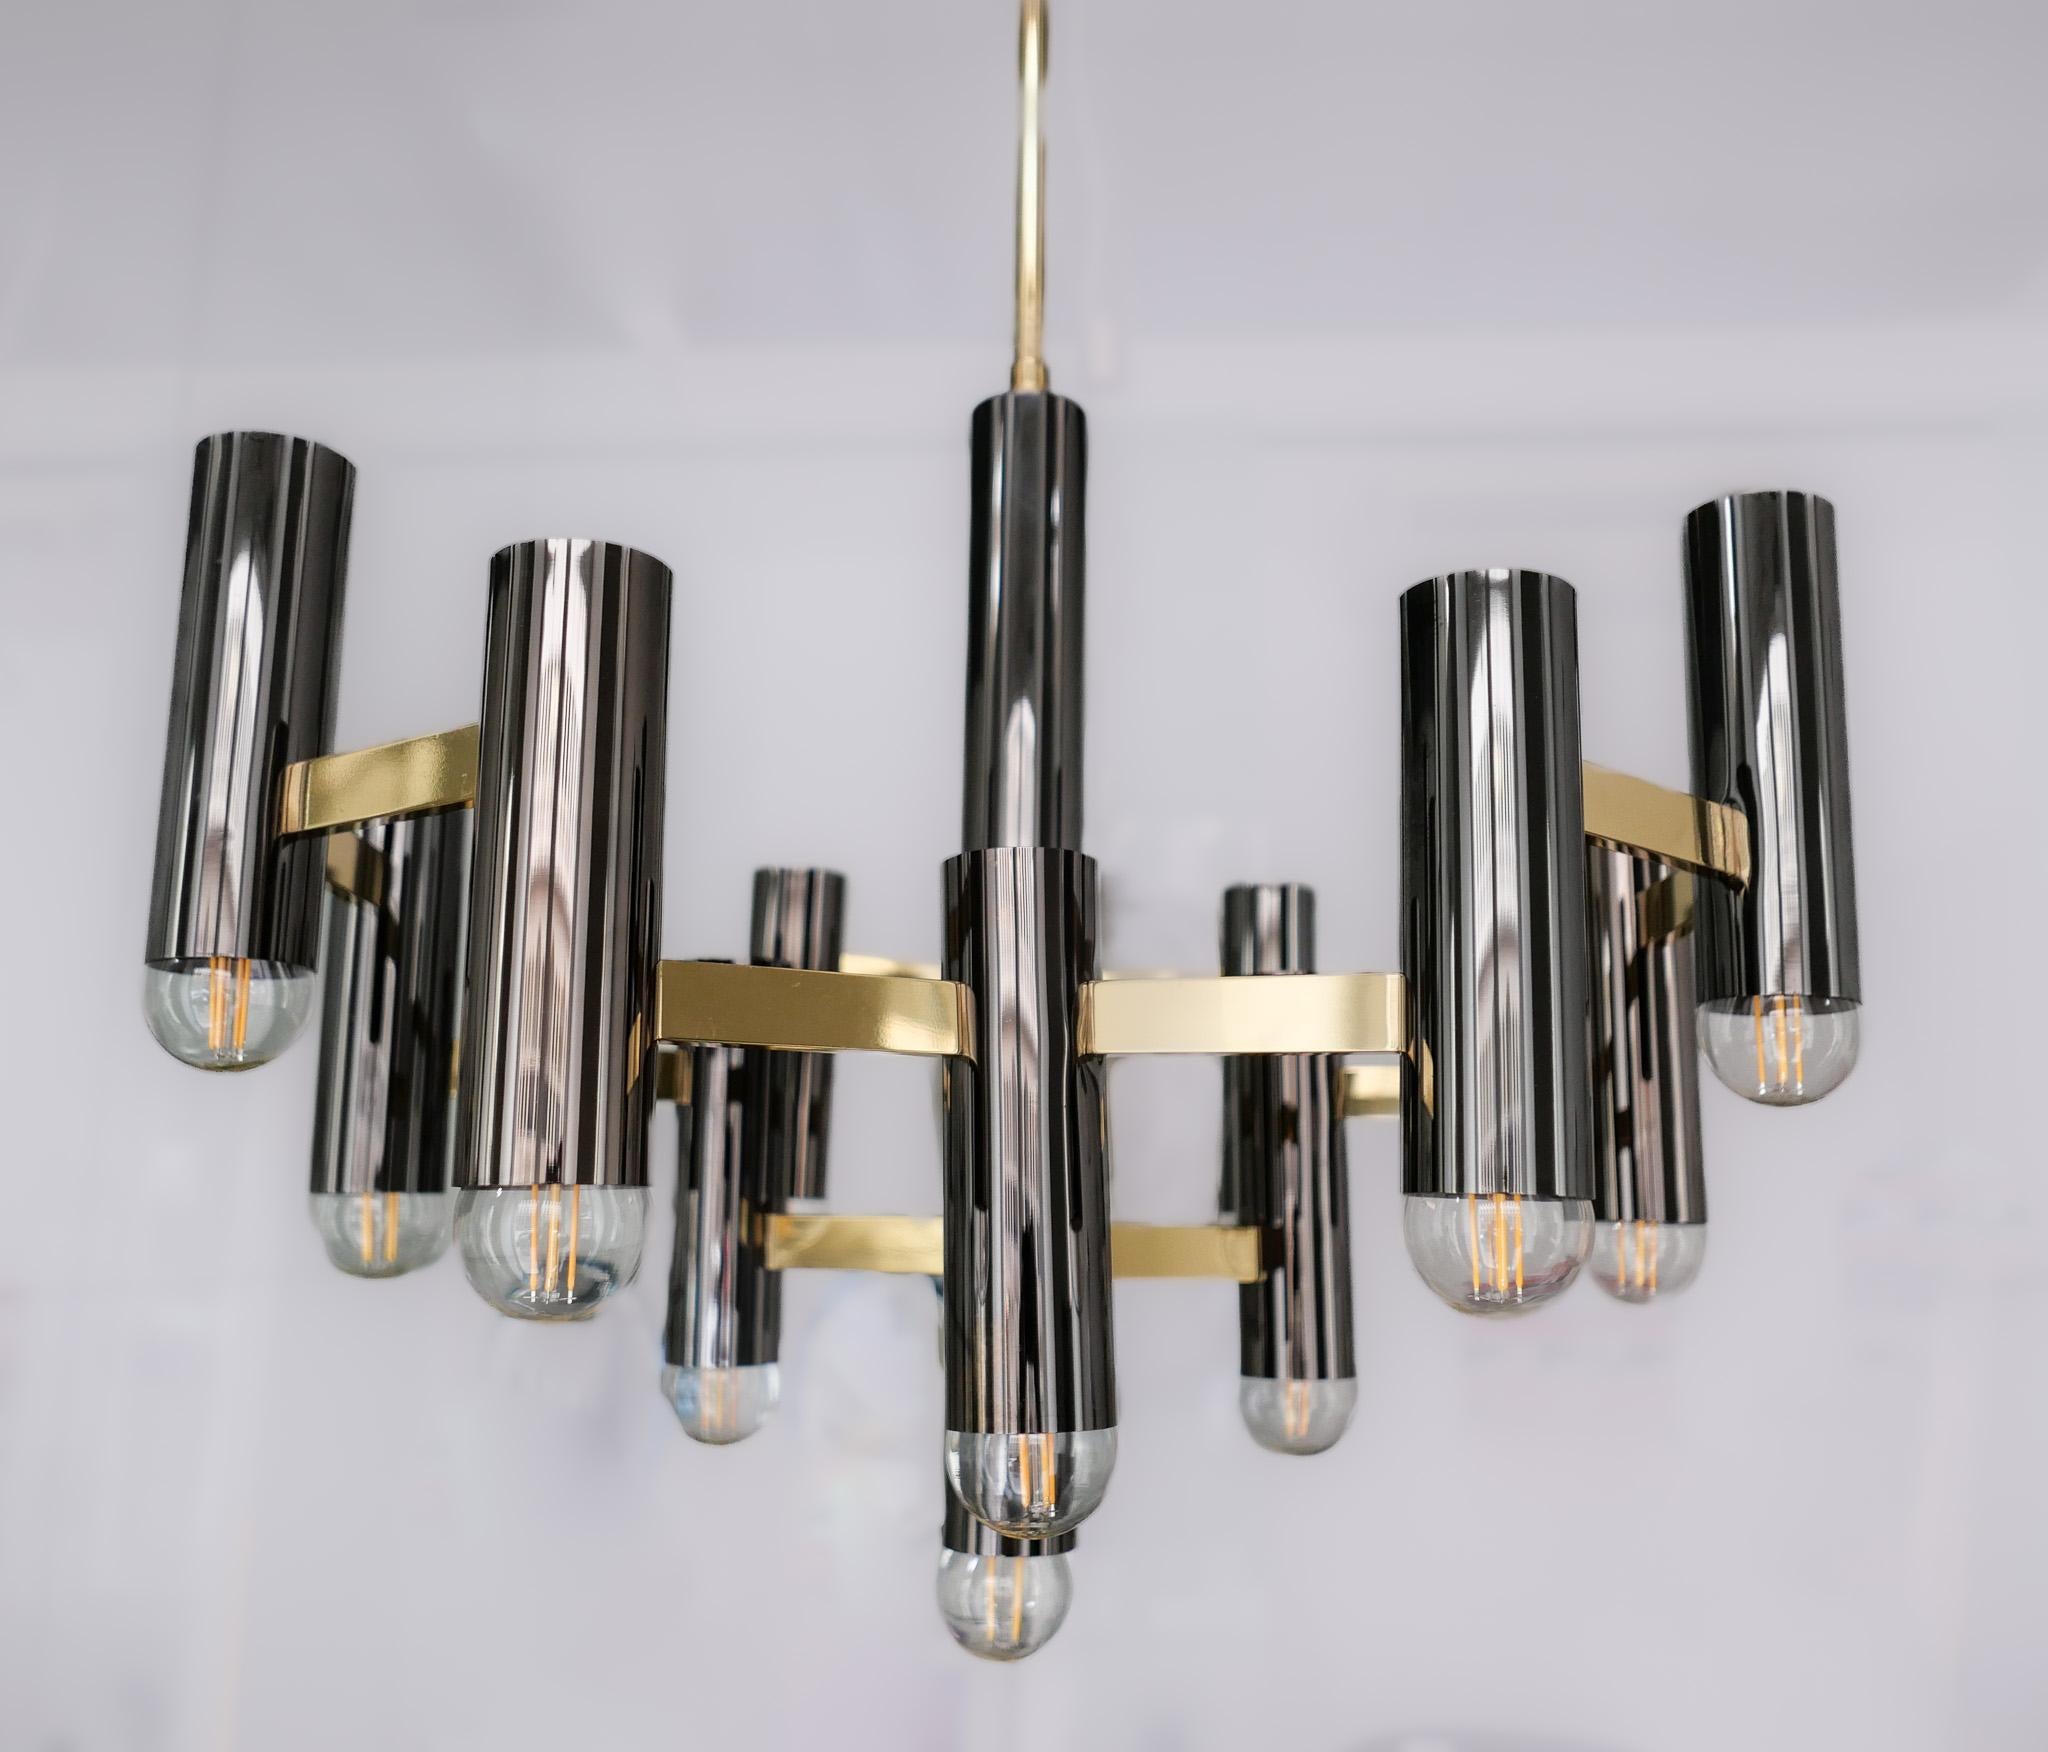 Mid-Century Modern brass chandelier by Gaetano Sciolari, Italy, 1970s.

This elegant chandelier was designed by the Gaetano Sciolari in the 1970s. The lamp consists of 13 tubular socket holders in shiny chromed metal. These 13 sockets are held by